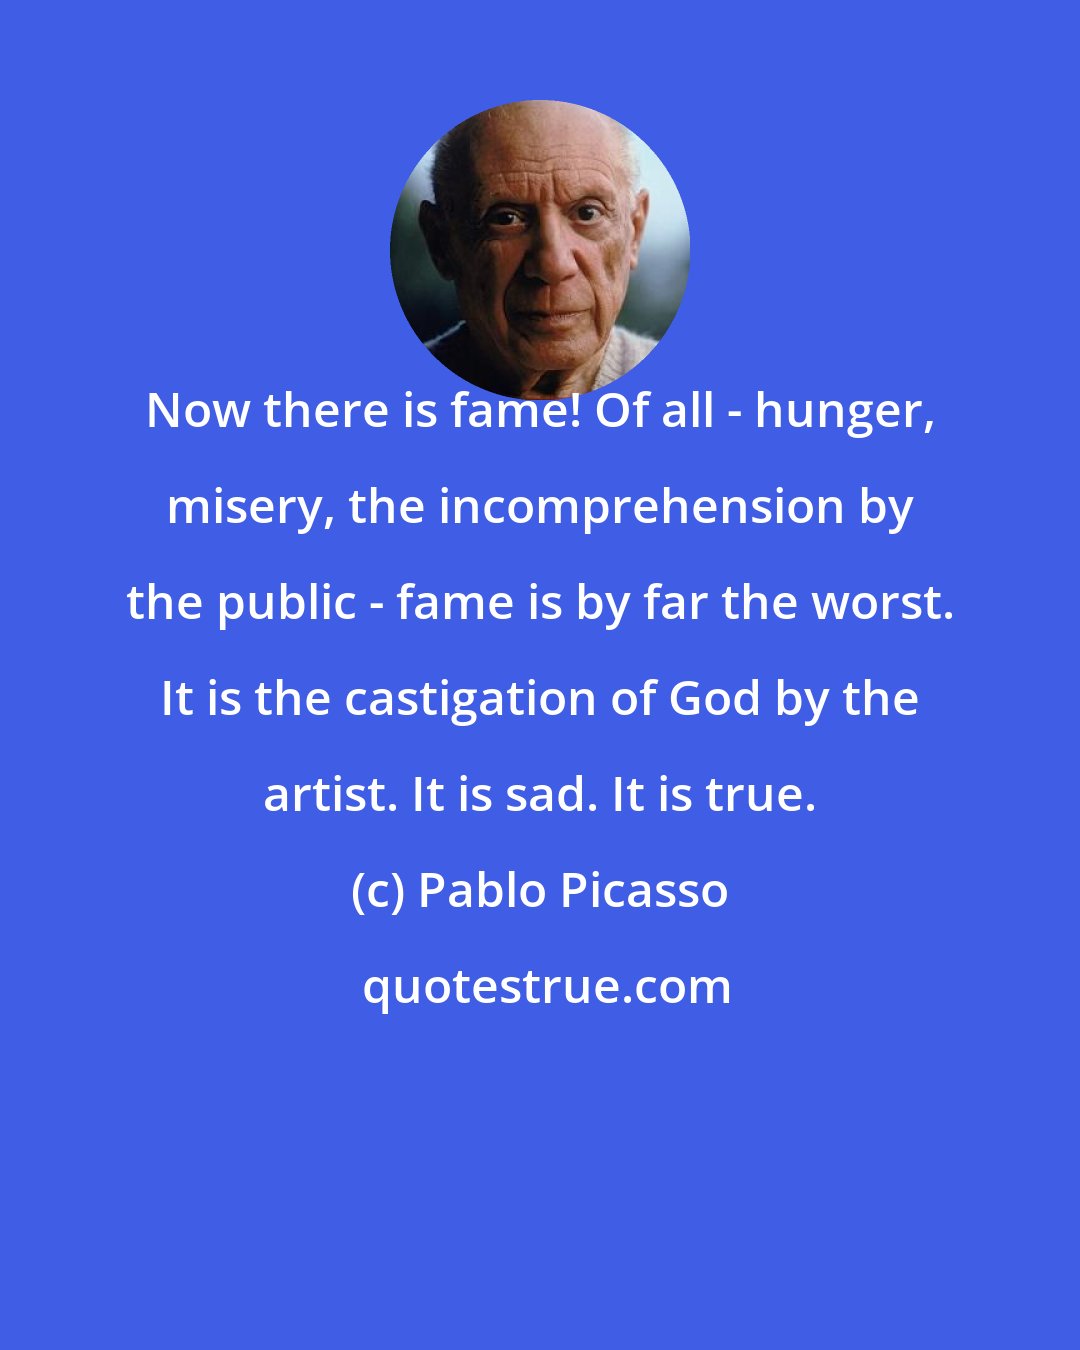 Pablo Picasso: Now there is fame! Of all - hunger, misery, the incomprehension by the public - fame is by far the worst. It is the castigation of God by the artist. It is sad. It is true.